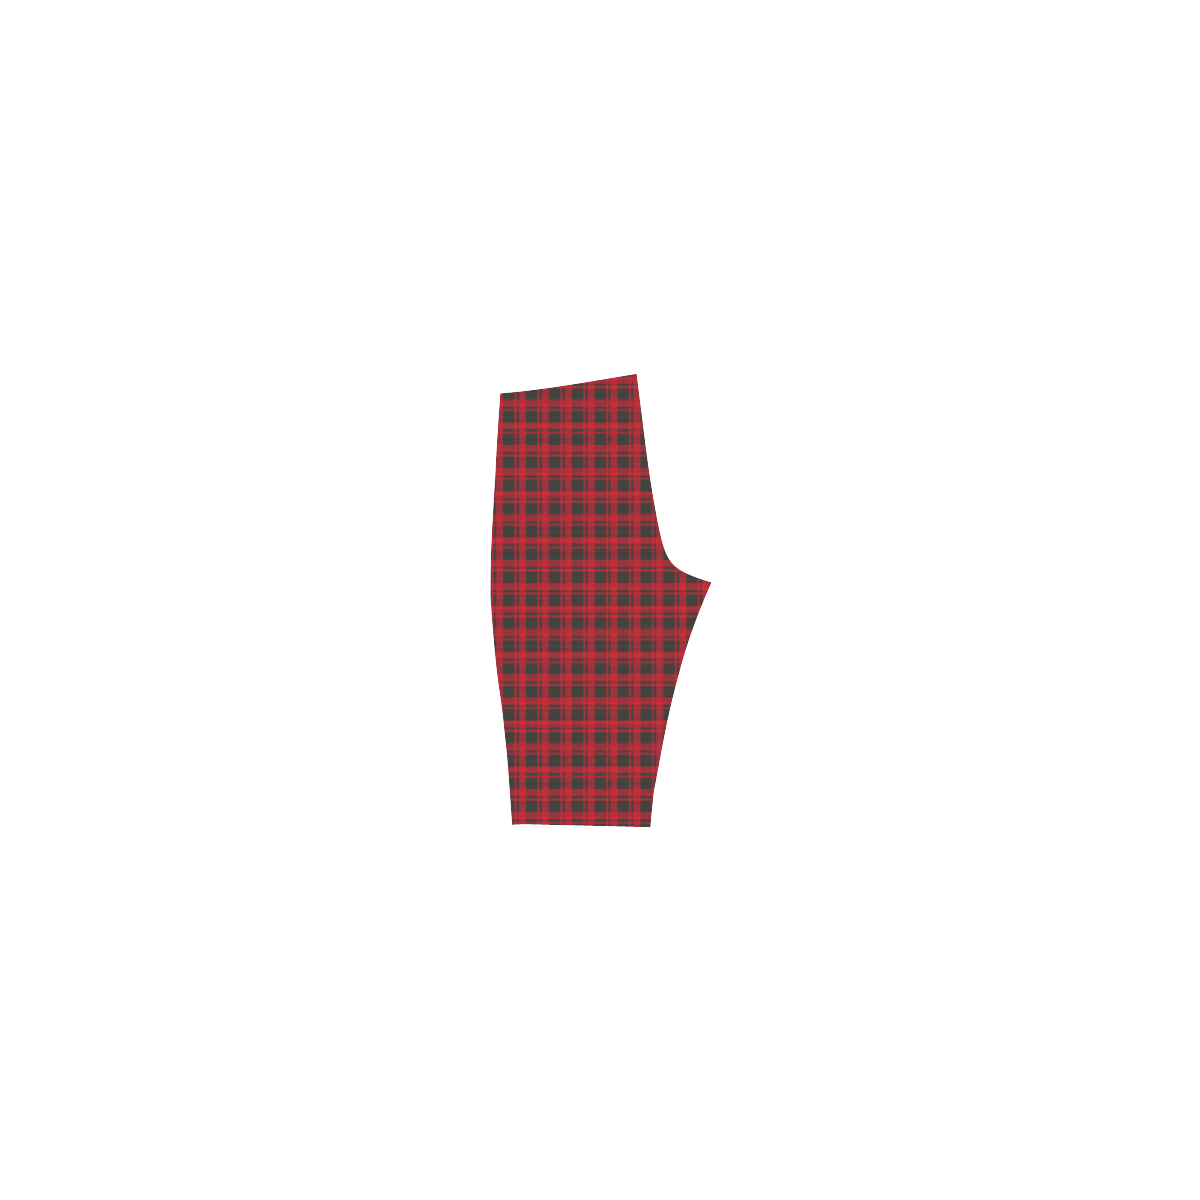 checkered Fabric red black by FeelGood Hestia Cropped Leggings (Model L03)